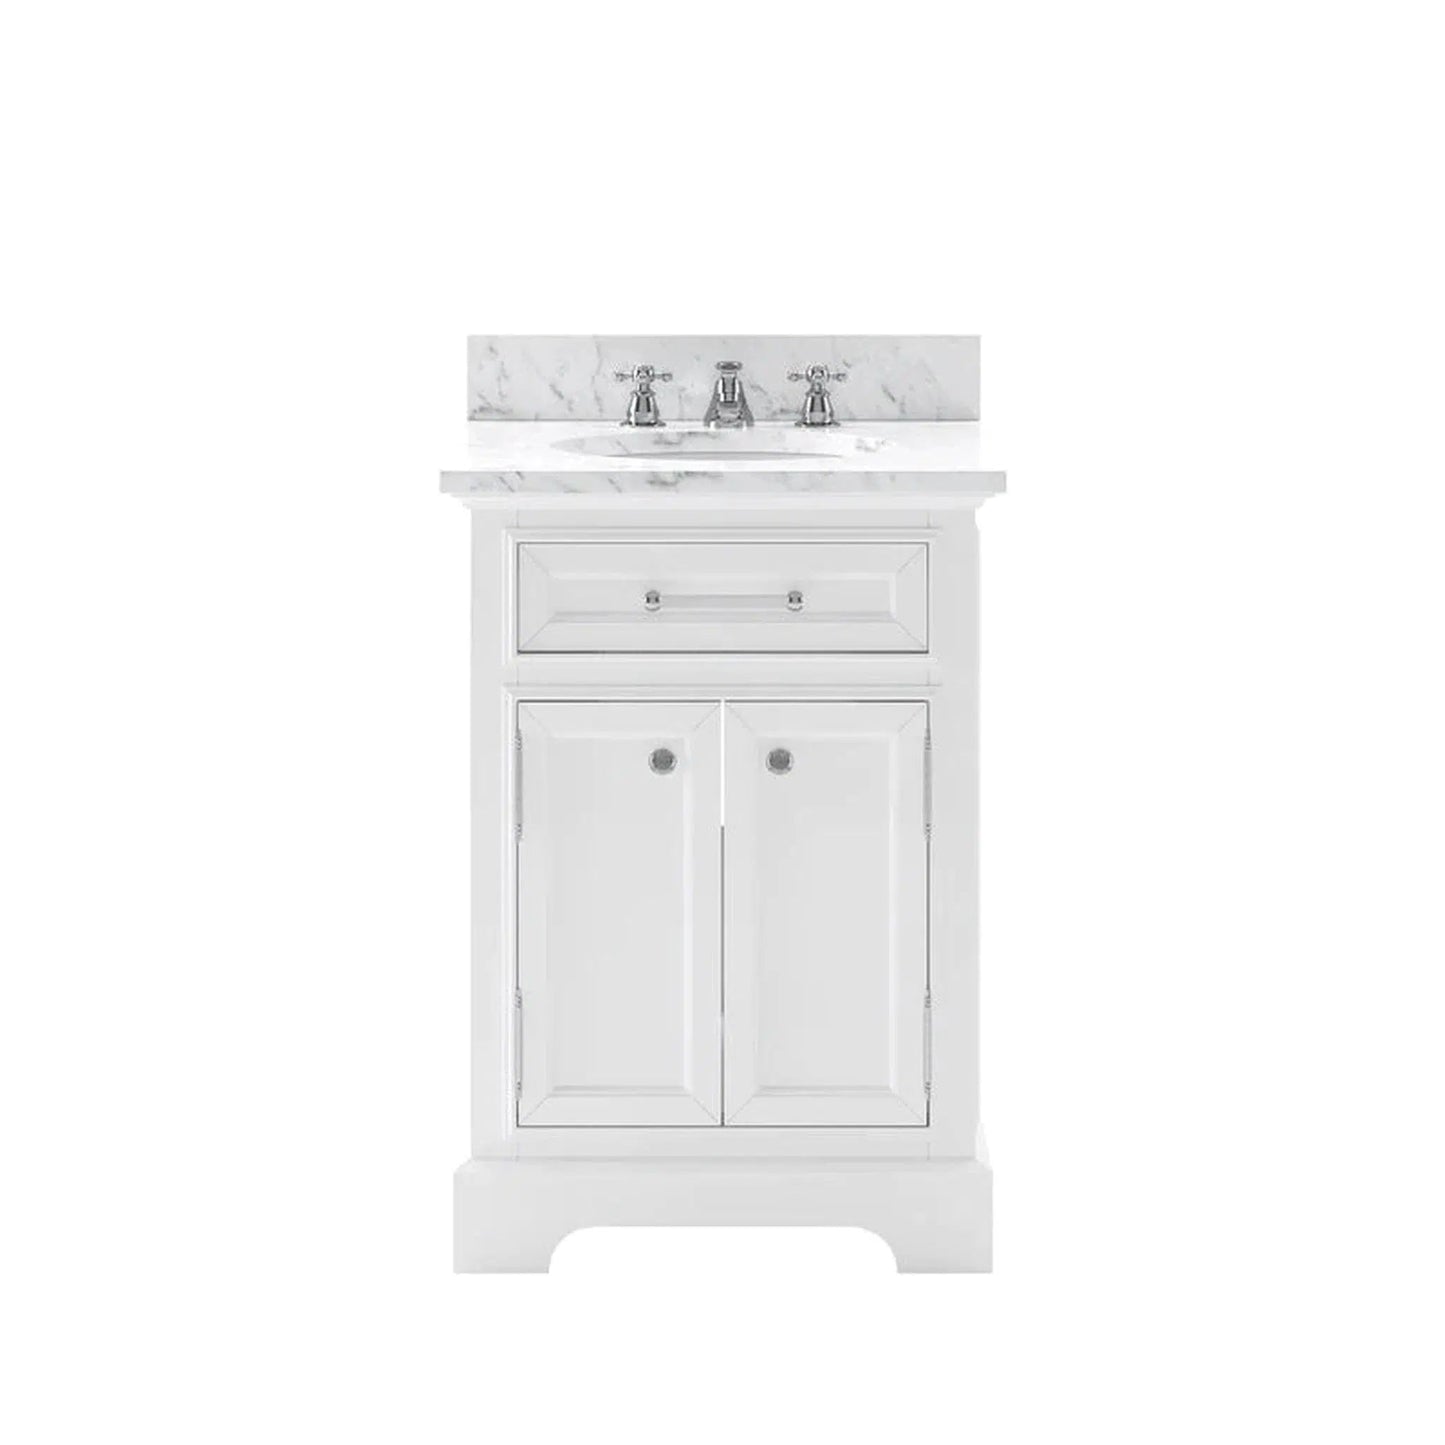 Water Creation 24 Inch Pure White Single Sink Bathroom Vanity With Matching Framed Mirror From The Derby Collection